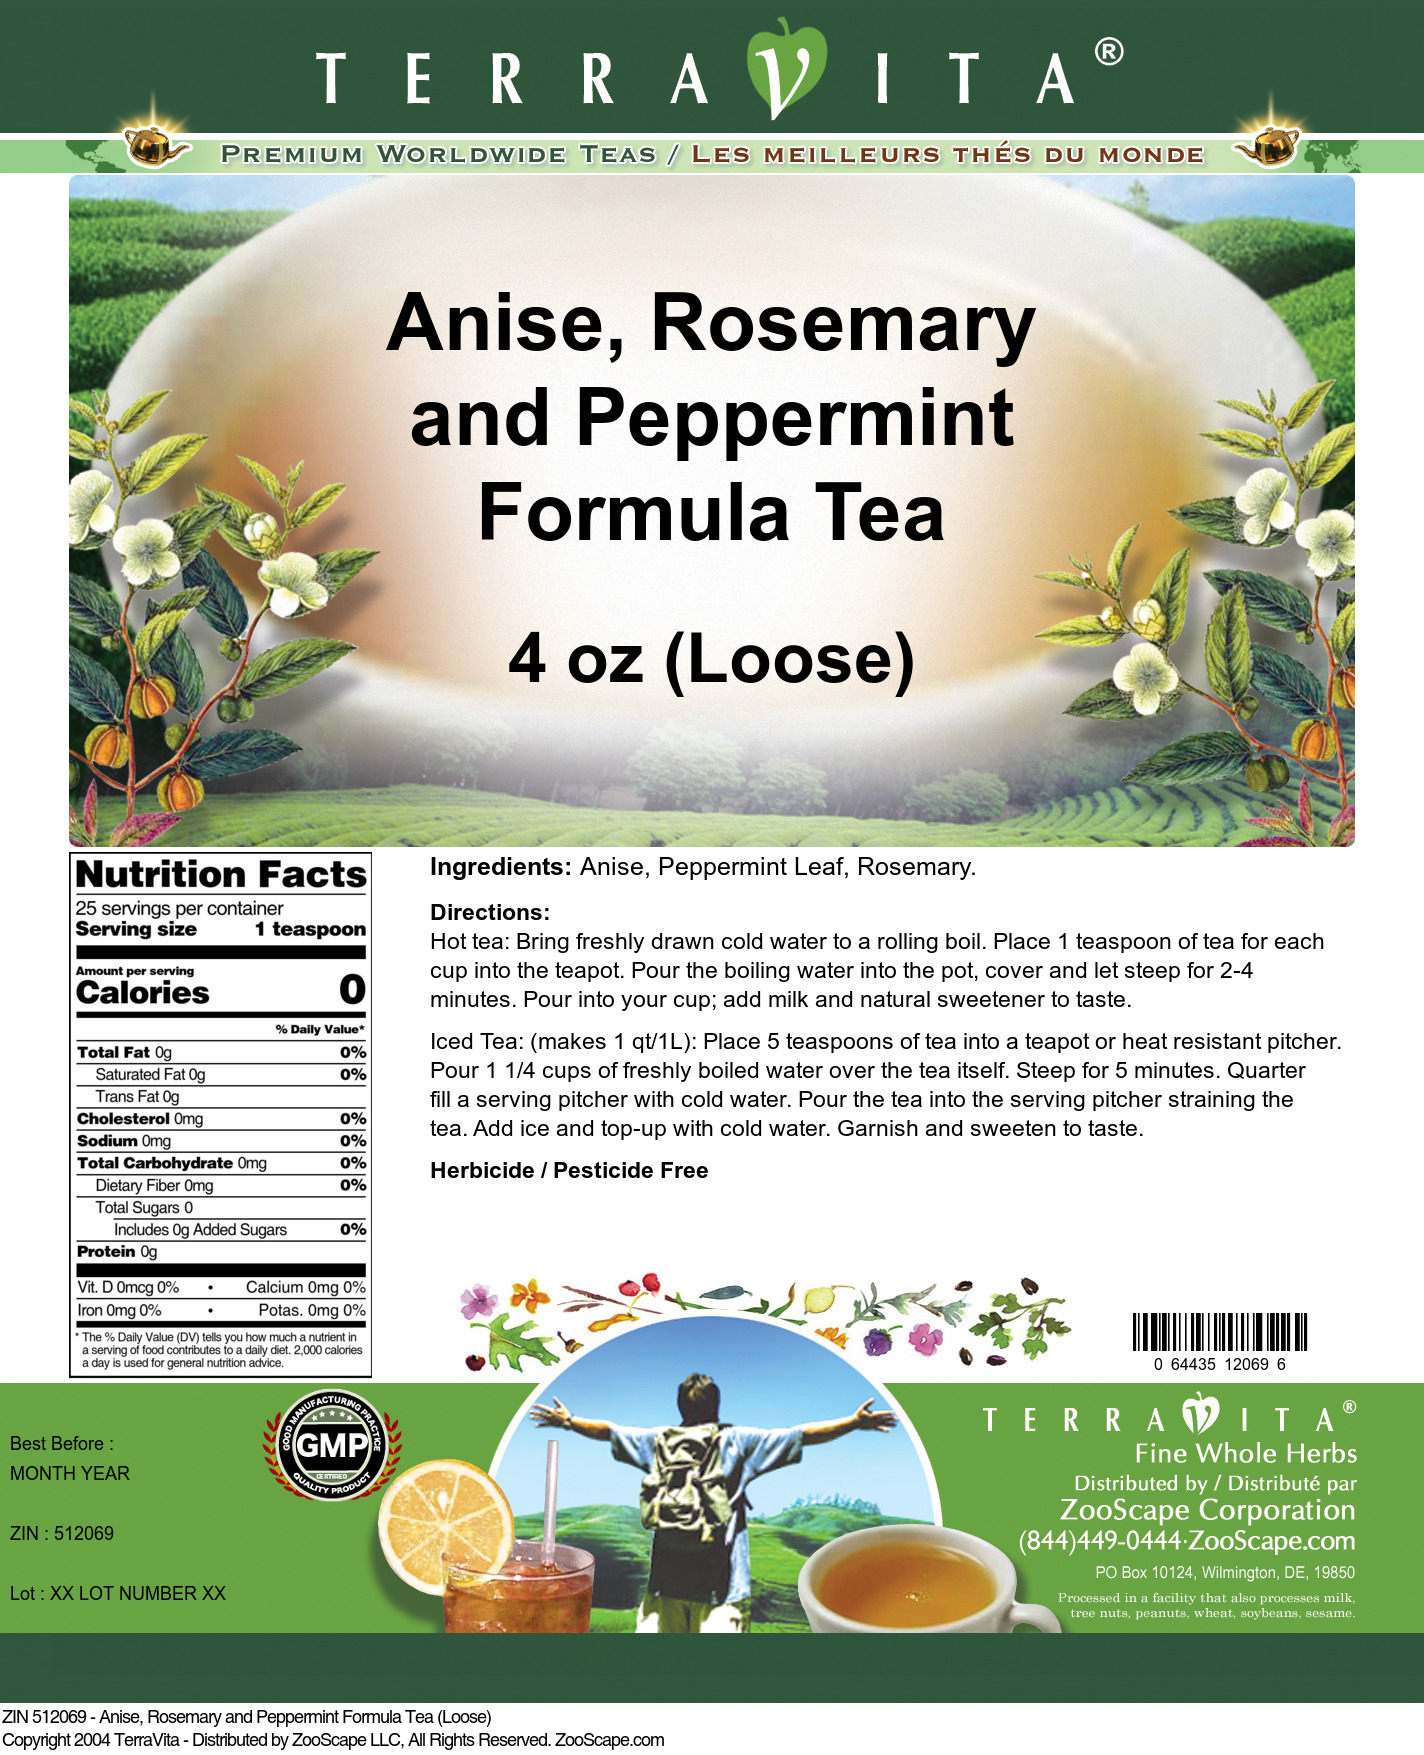 Anise, Rosemary and Peppermint Formula Tea (Loose) - Label